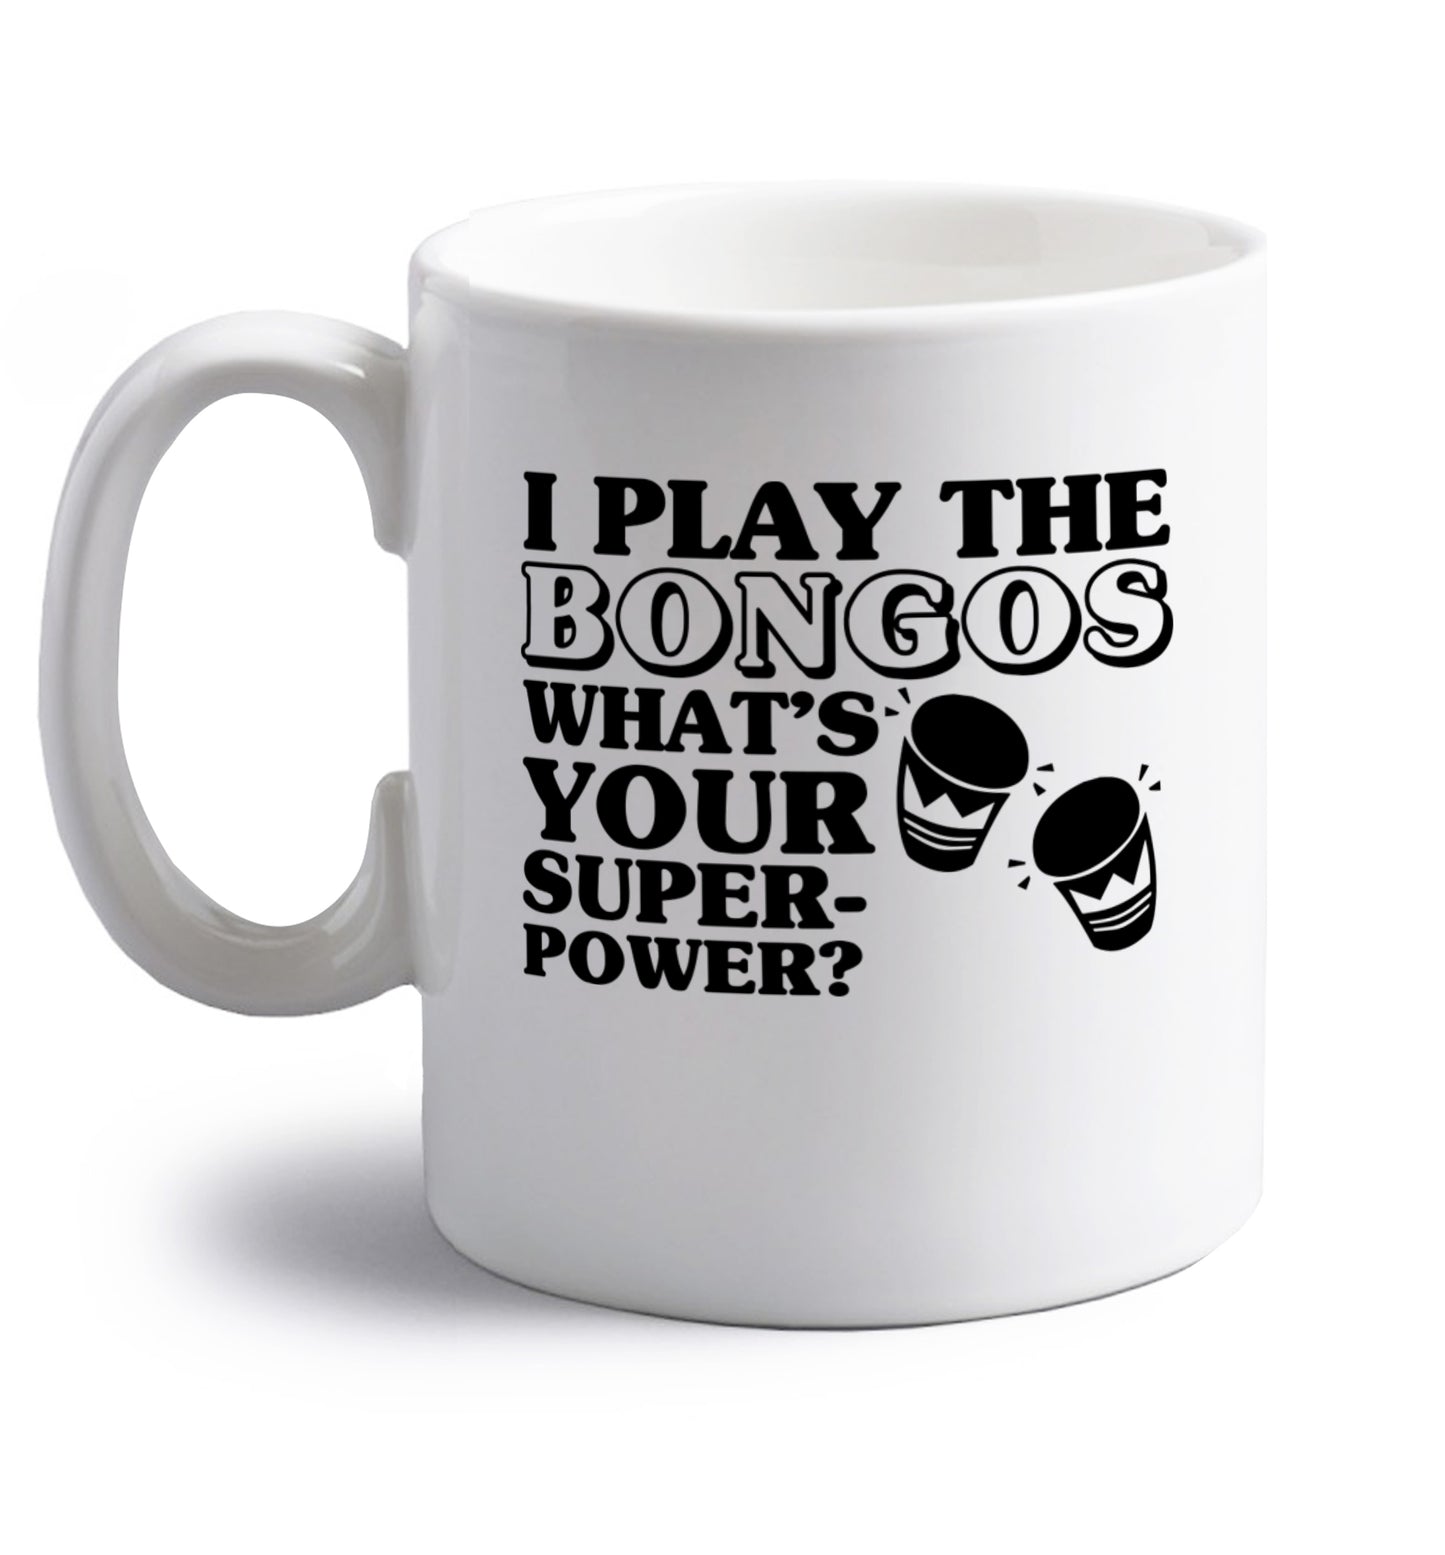 I play the bongos what's your superpower? right handed white ceramic mug 